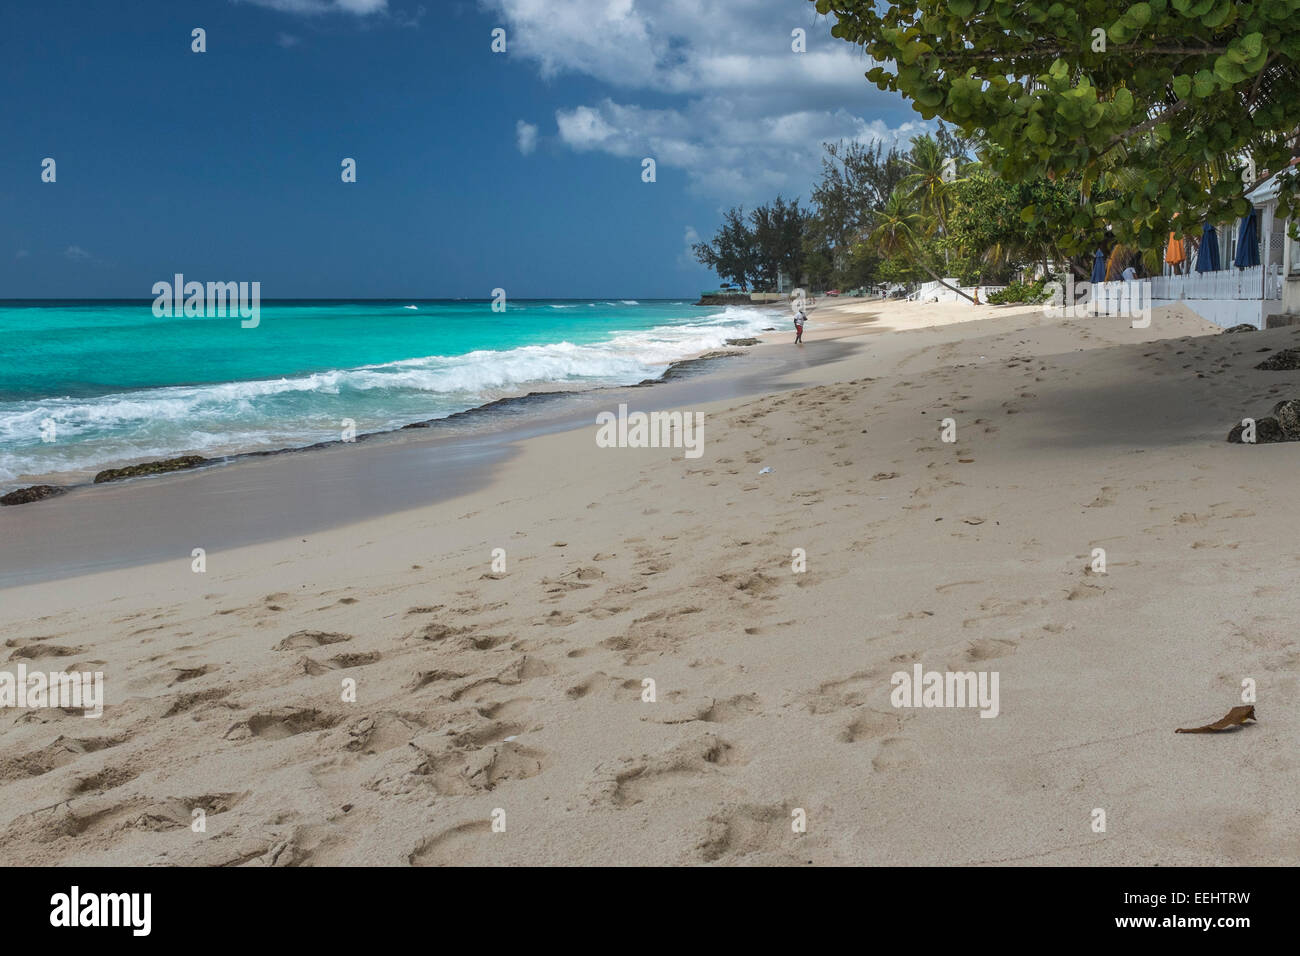 Tourists on Worthing Beach on the south coast of the Caribbean island of Barbados in the West Indies - EDITORIAL USE ONLY Stock Photo